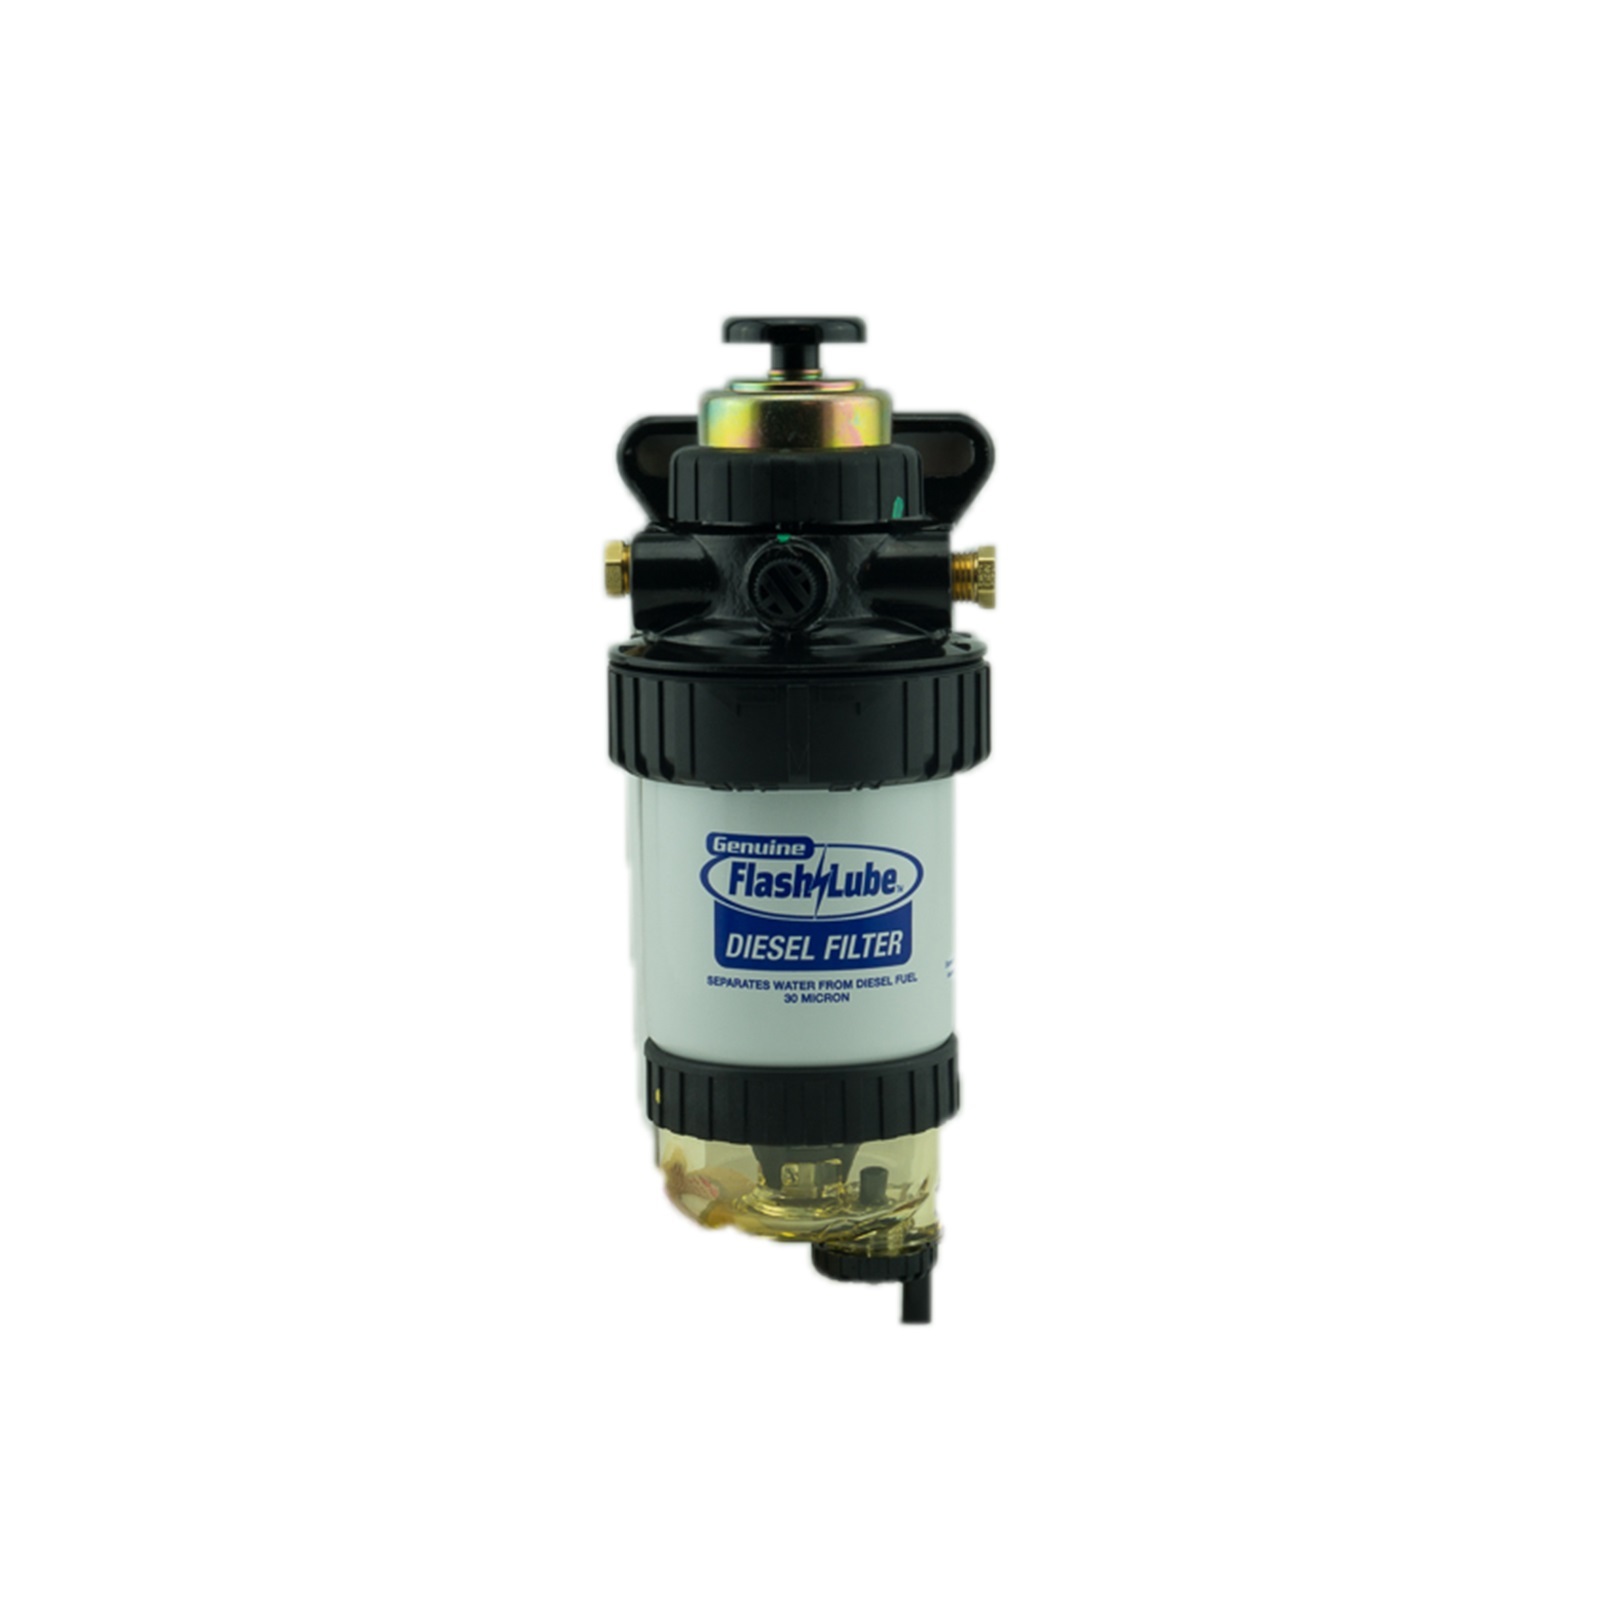 Flashlube (Fuel Manager) Hand Primer Pump for FDF & FM100, 42093, 42533 Filter Assemblies